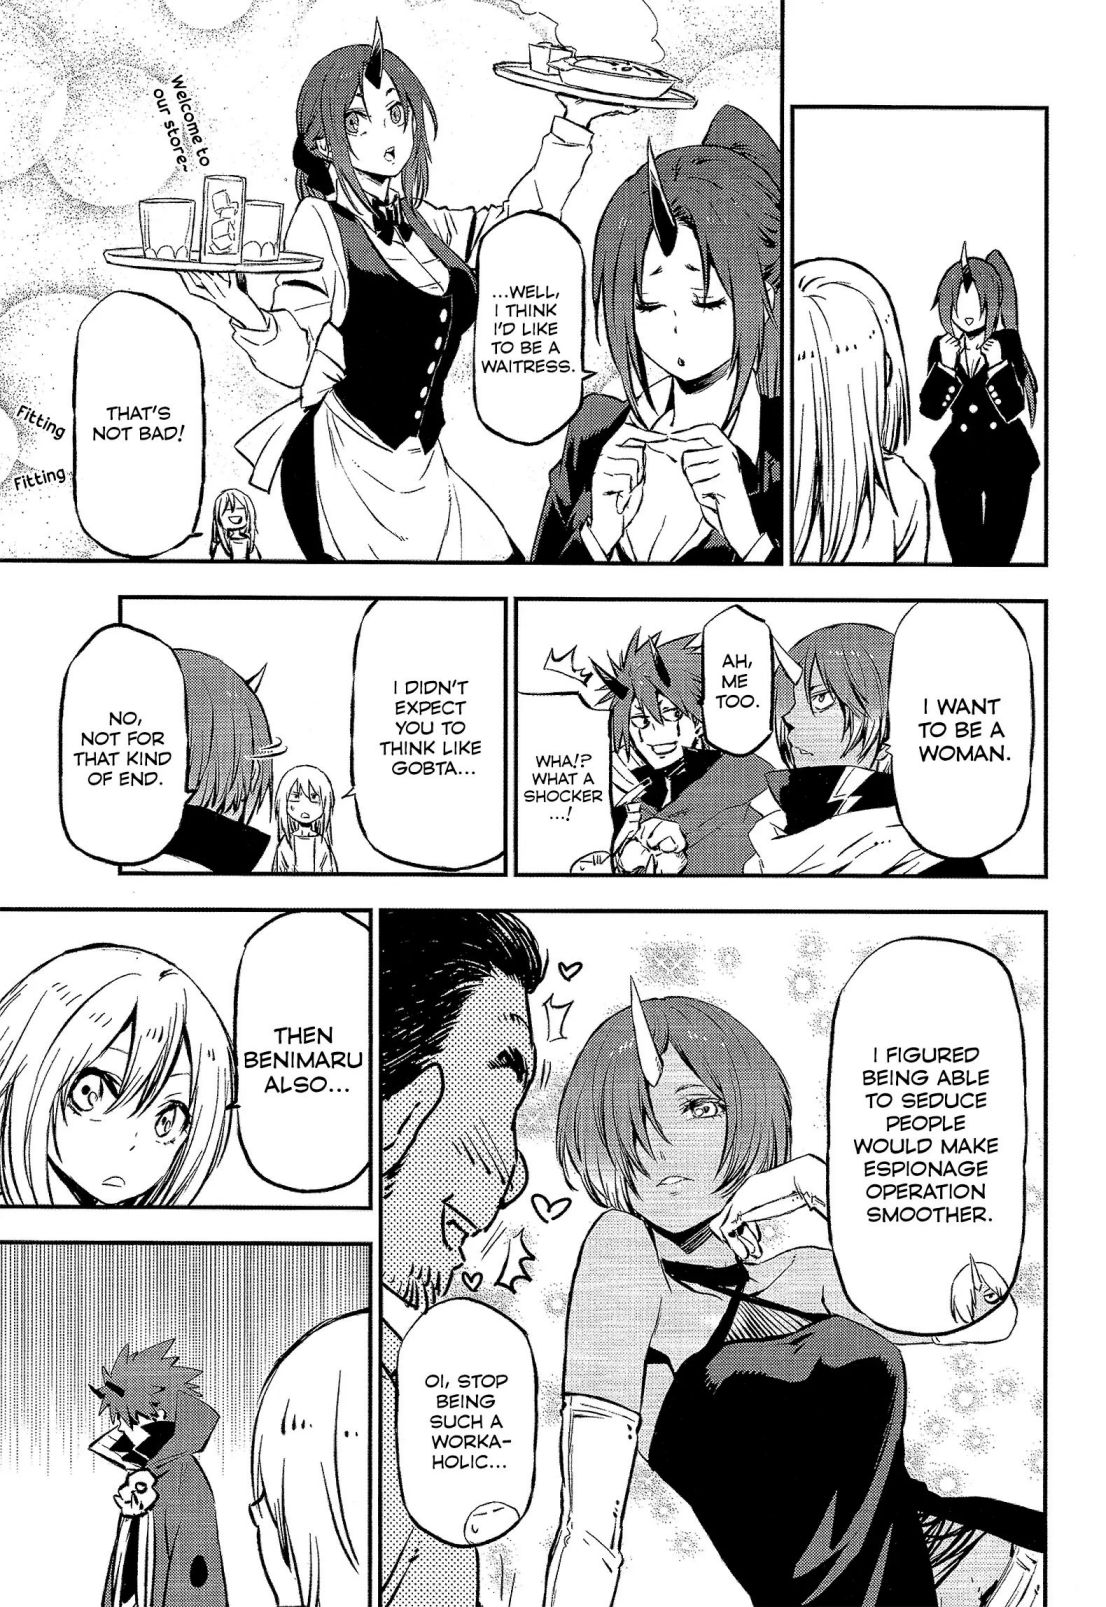 That Time I Got Reincarnated as a Slime – Tensura Short Stories - chapter 1 - #4